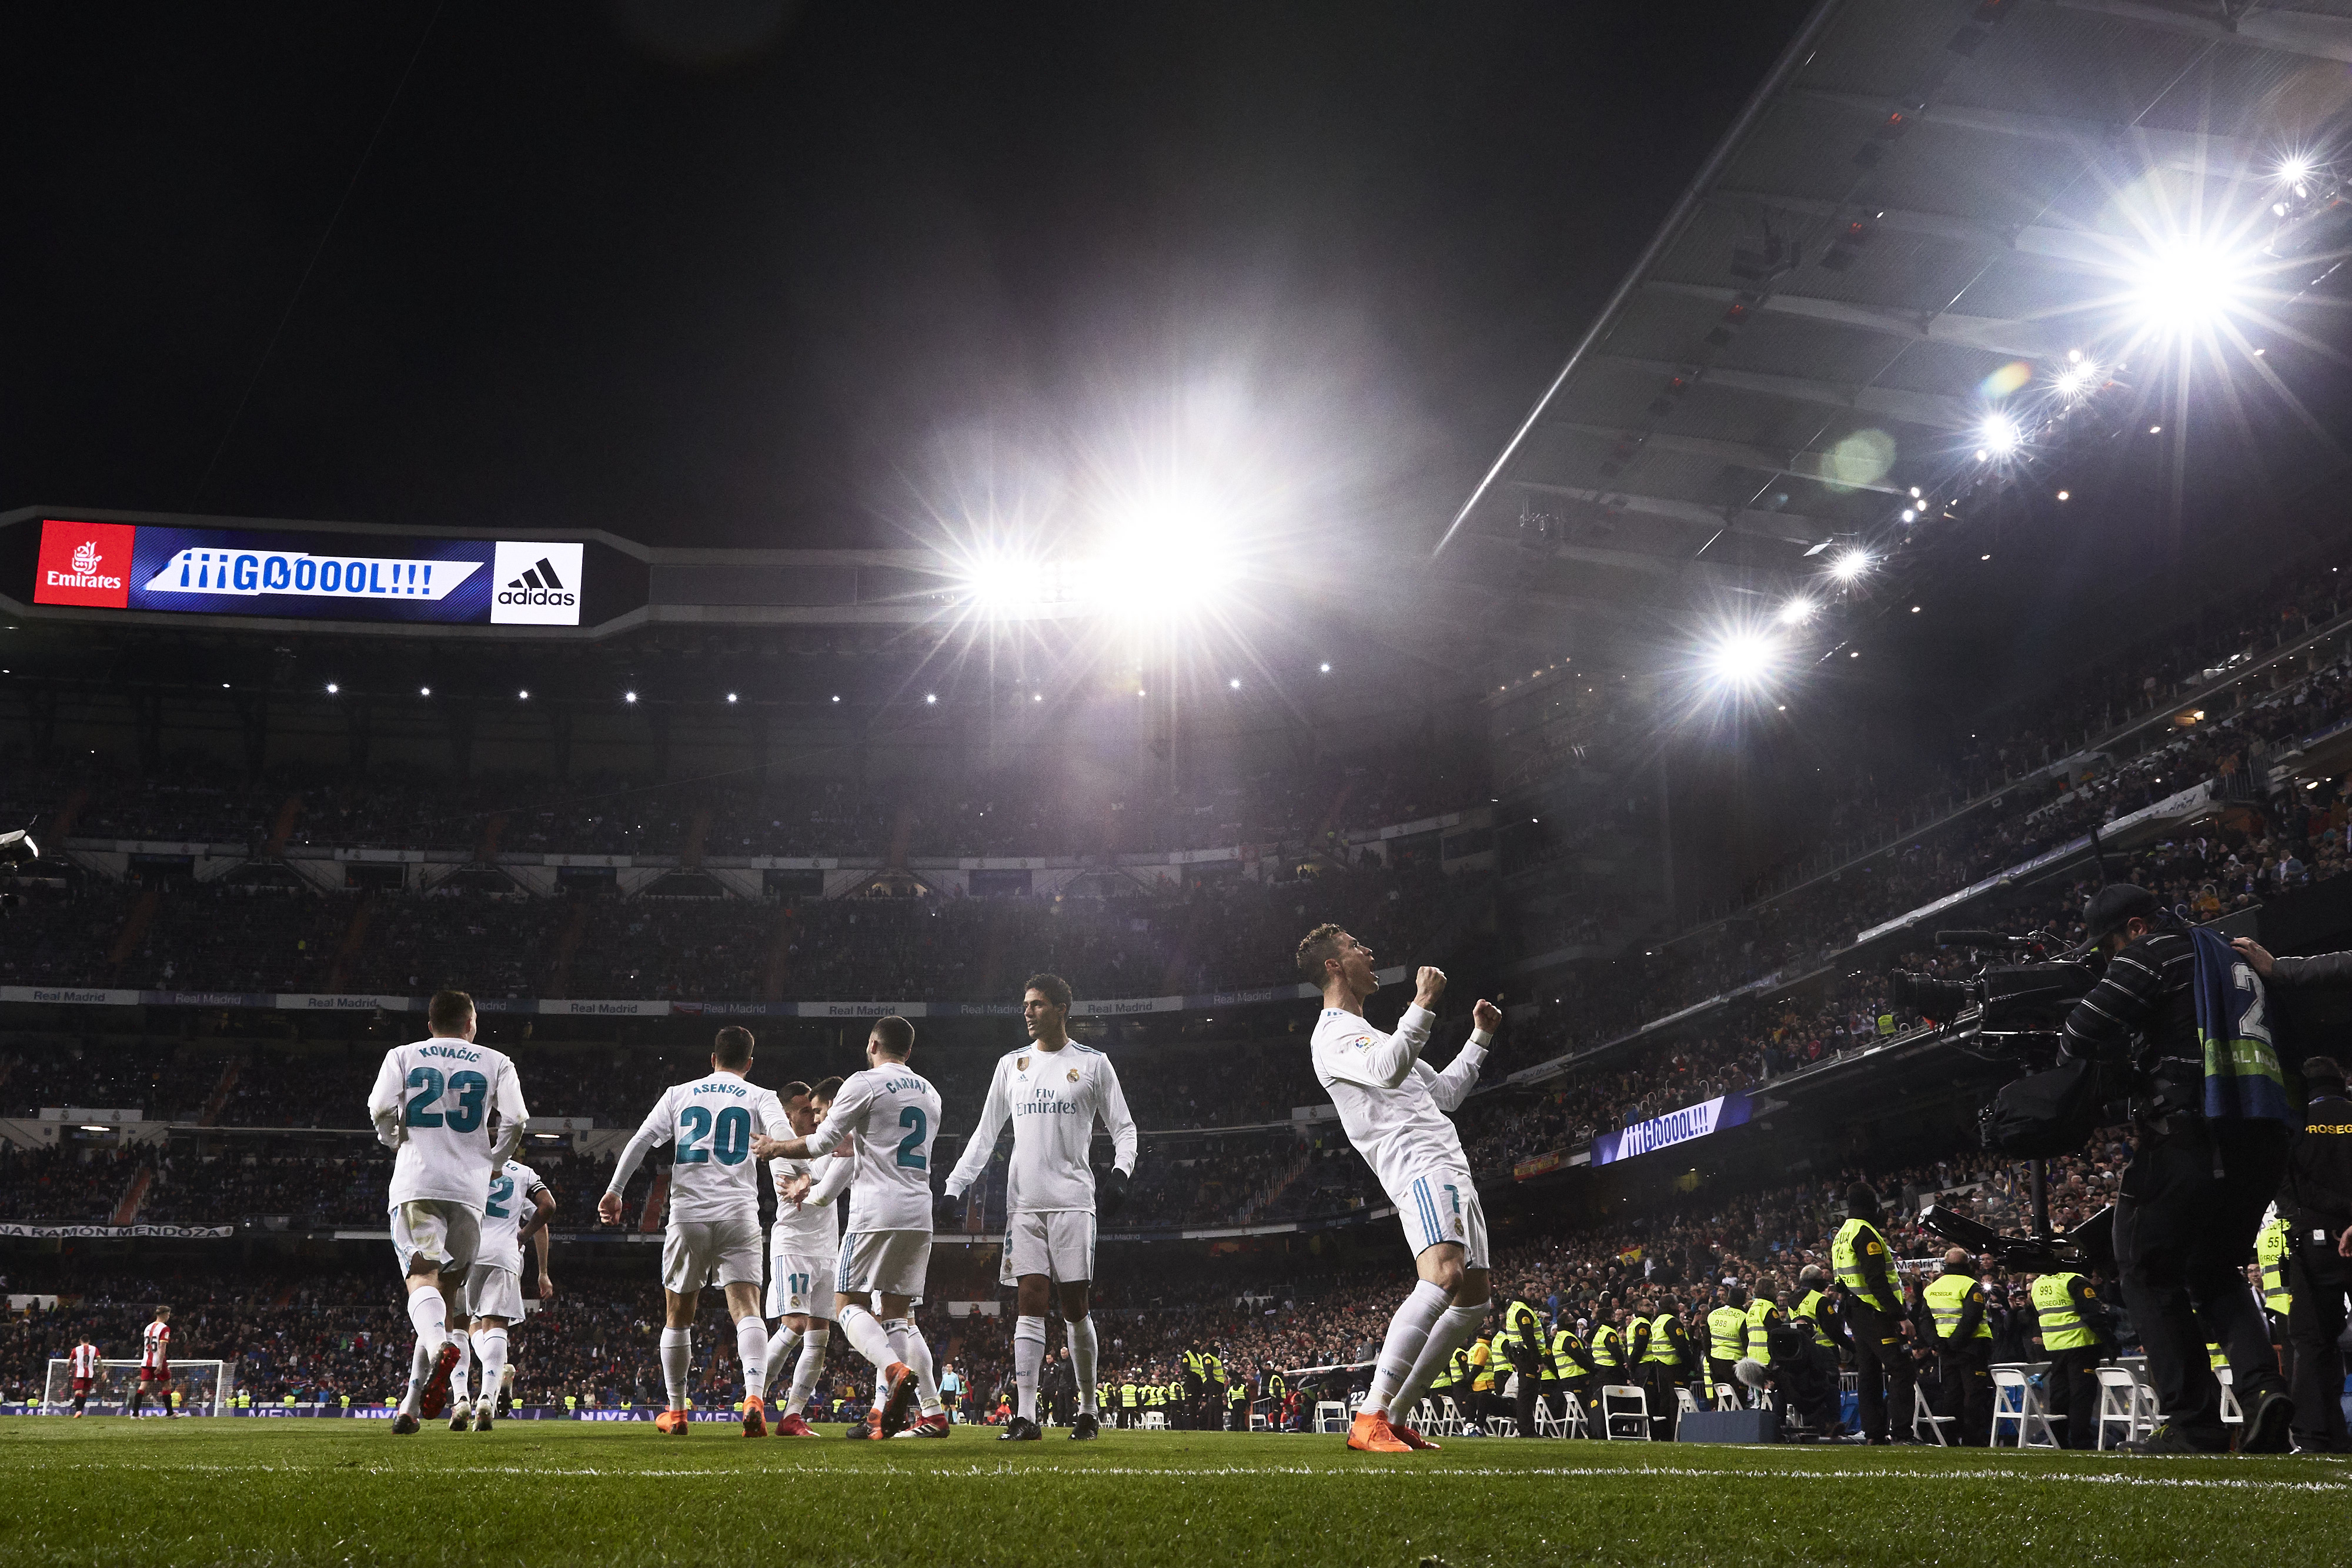 MADRID, SPAIN - MARCH 18: Cristiano Ronaldo of Real Madrid CF celebrates scoring their second goal during the La Liga match between Real Madrid CF and Girona FC at Estadio Santiago Bernabeu on March 18, 2018 in Madrid, Spain. (Photo by Gonzalo Arroyo Moreno/Getty Images)